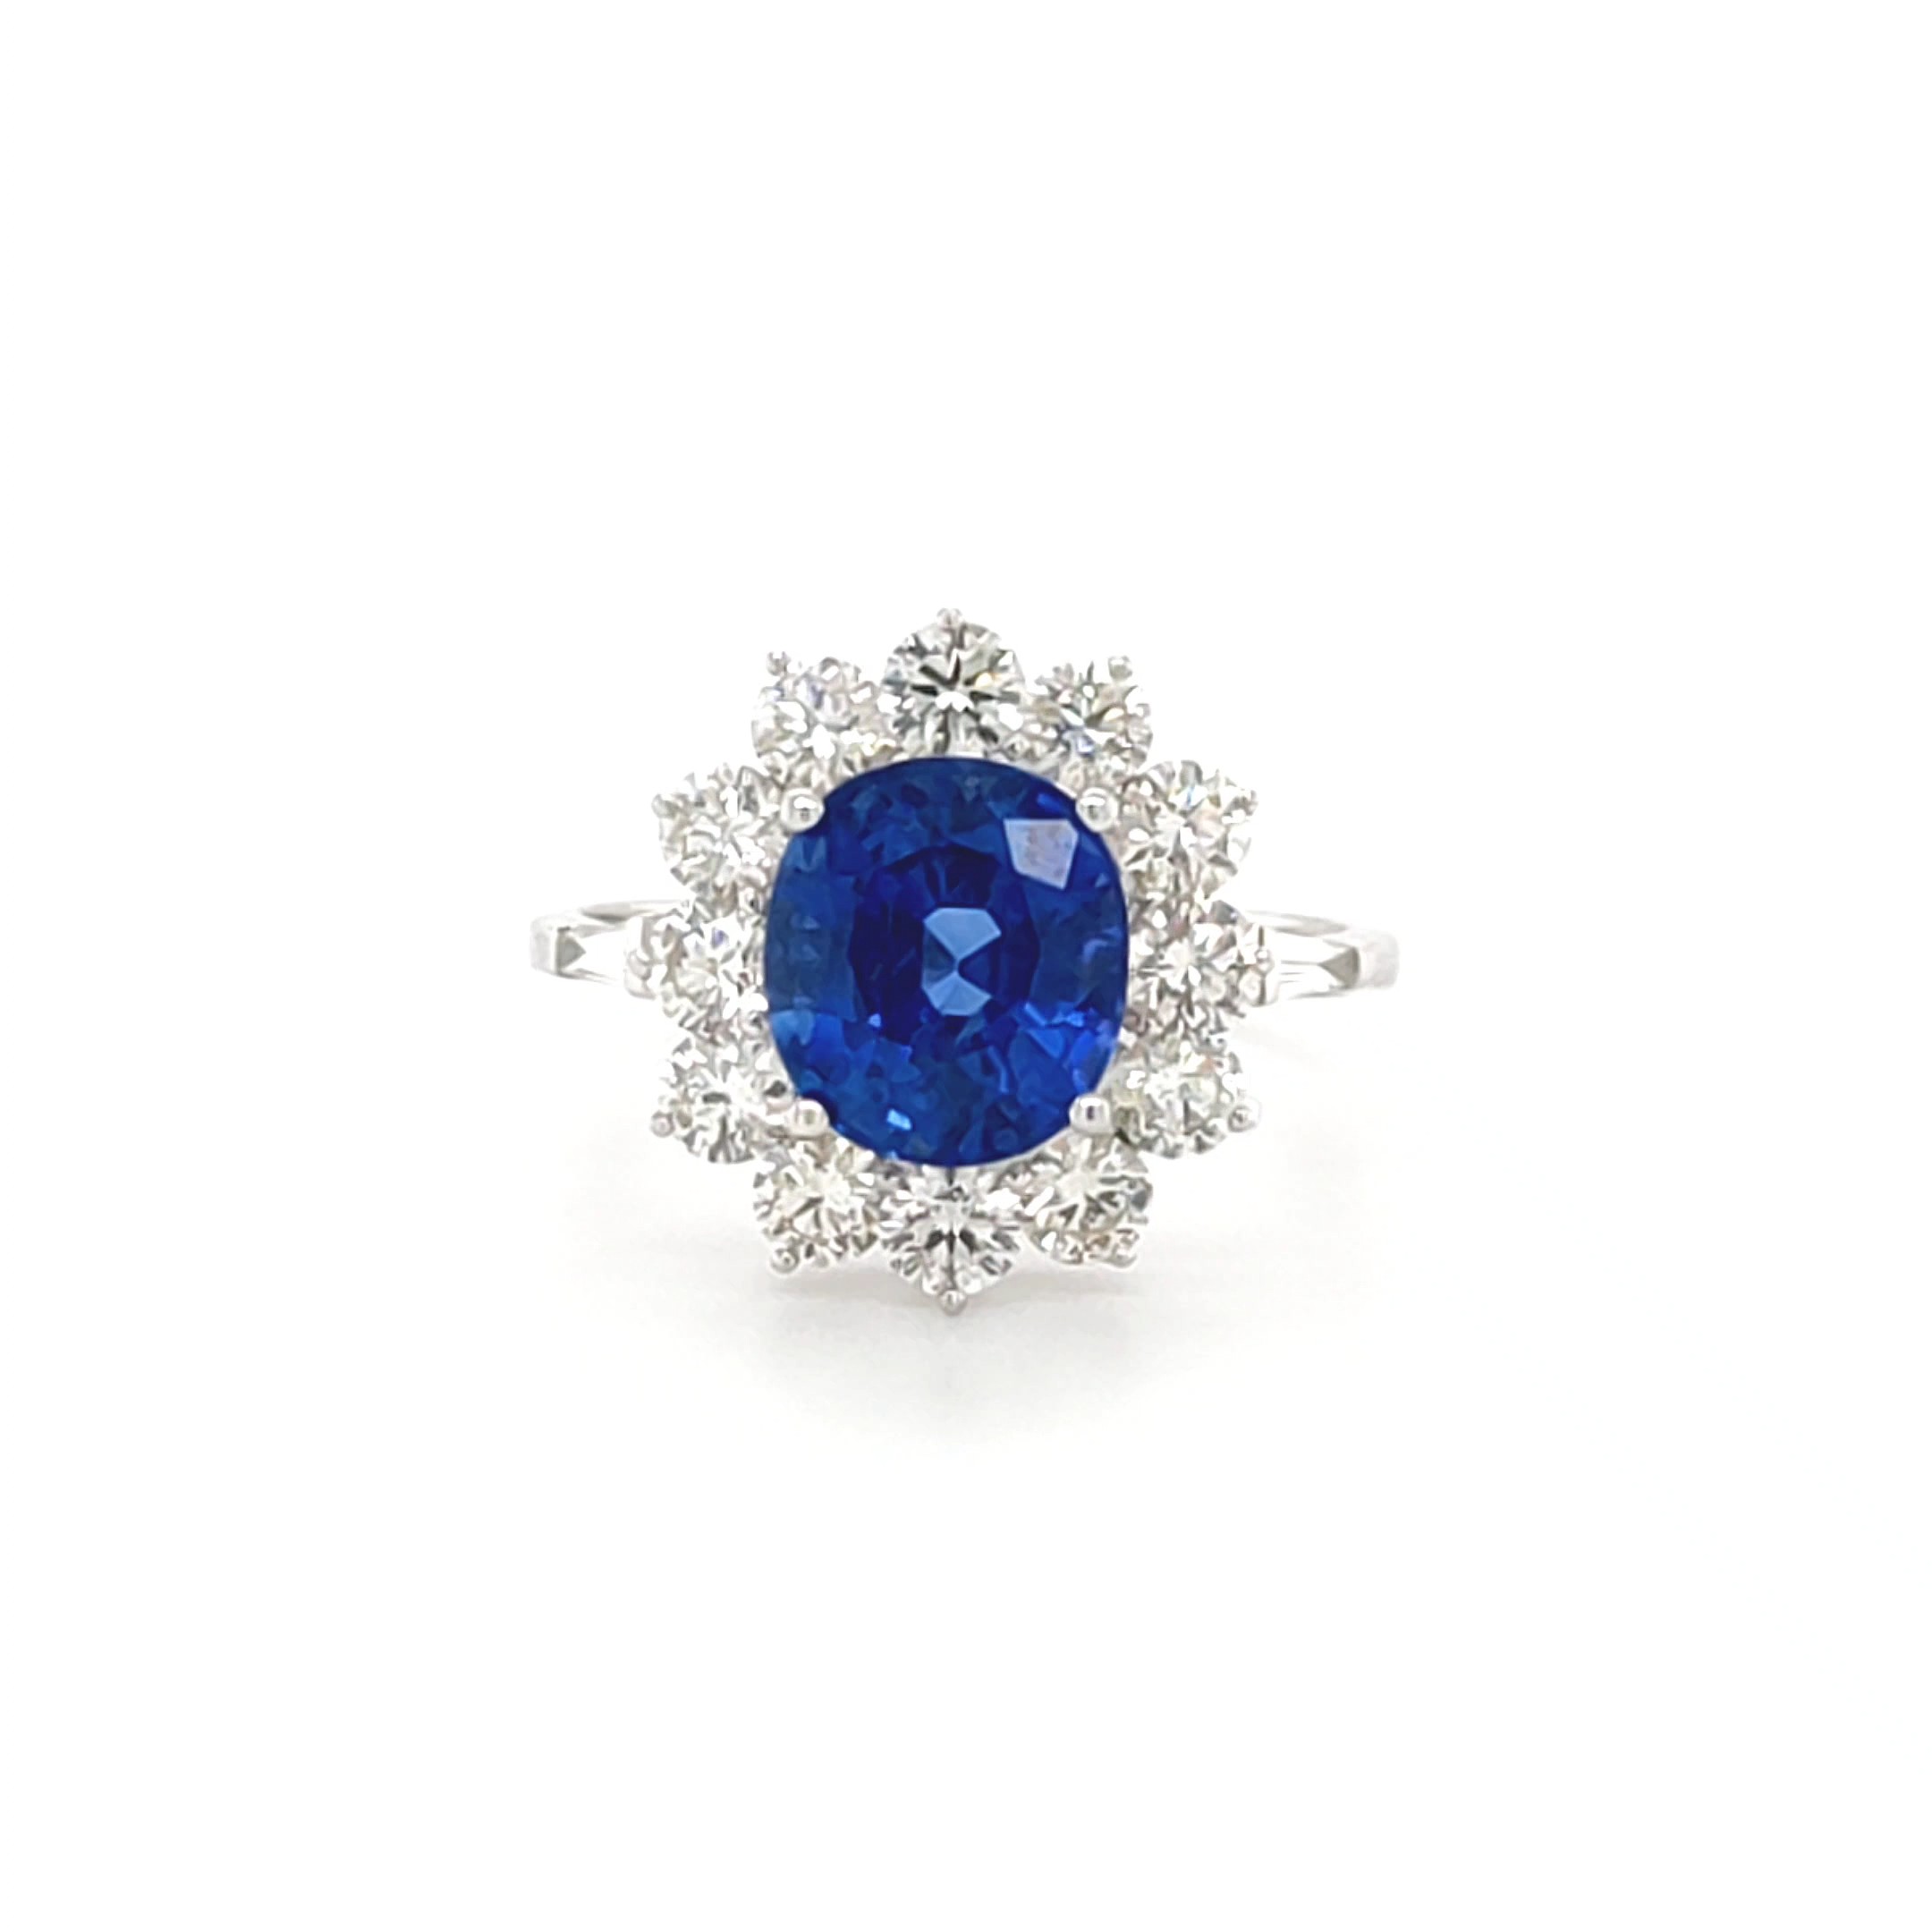 18ct White Gold 3.32ct (Assessed) Sapphire and 1.33ct (Assessed) Diamond Cluster Ring – Pre-Owned